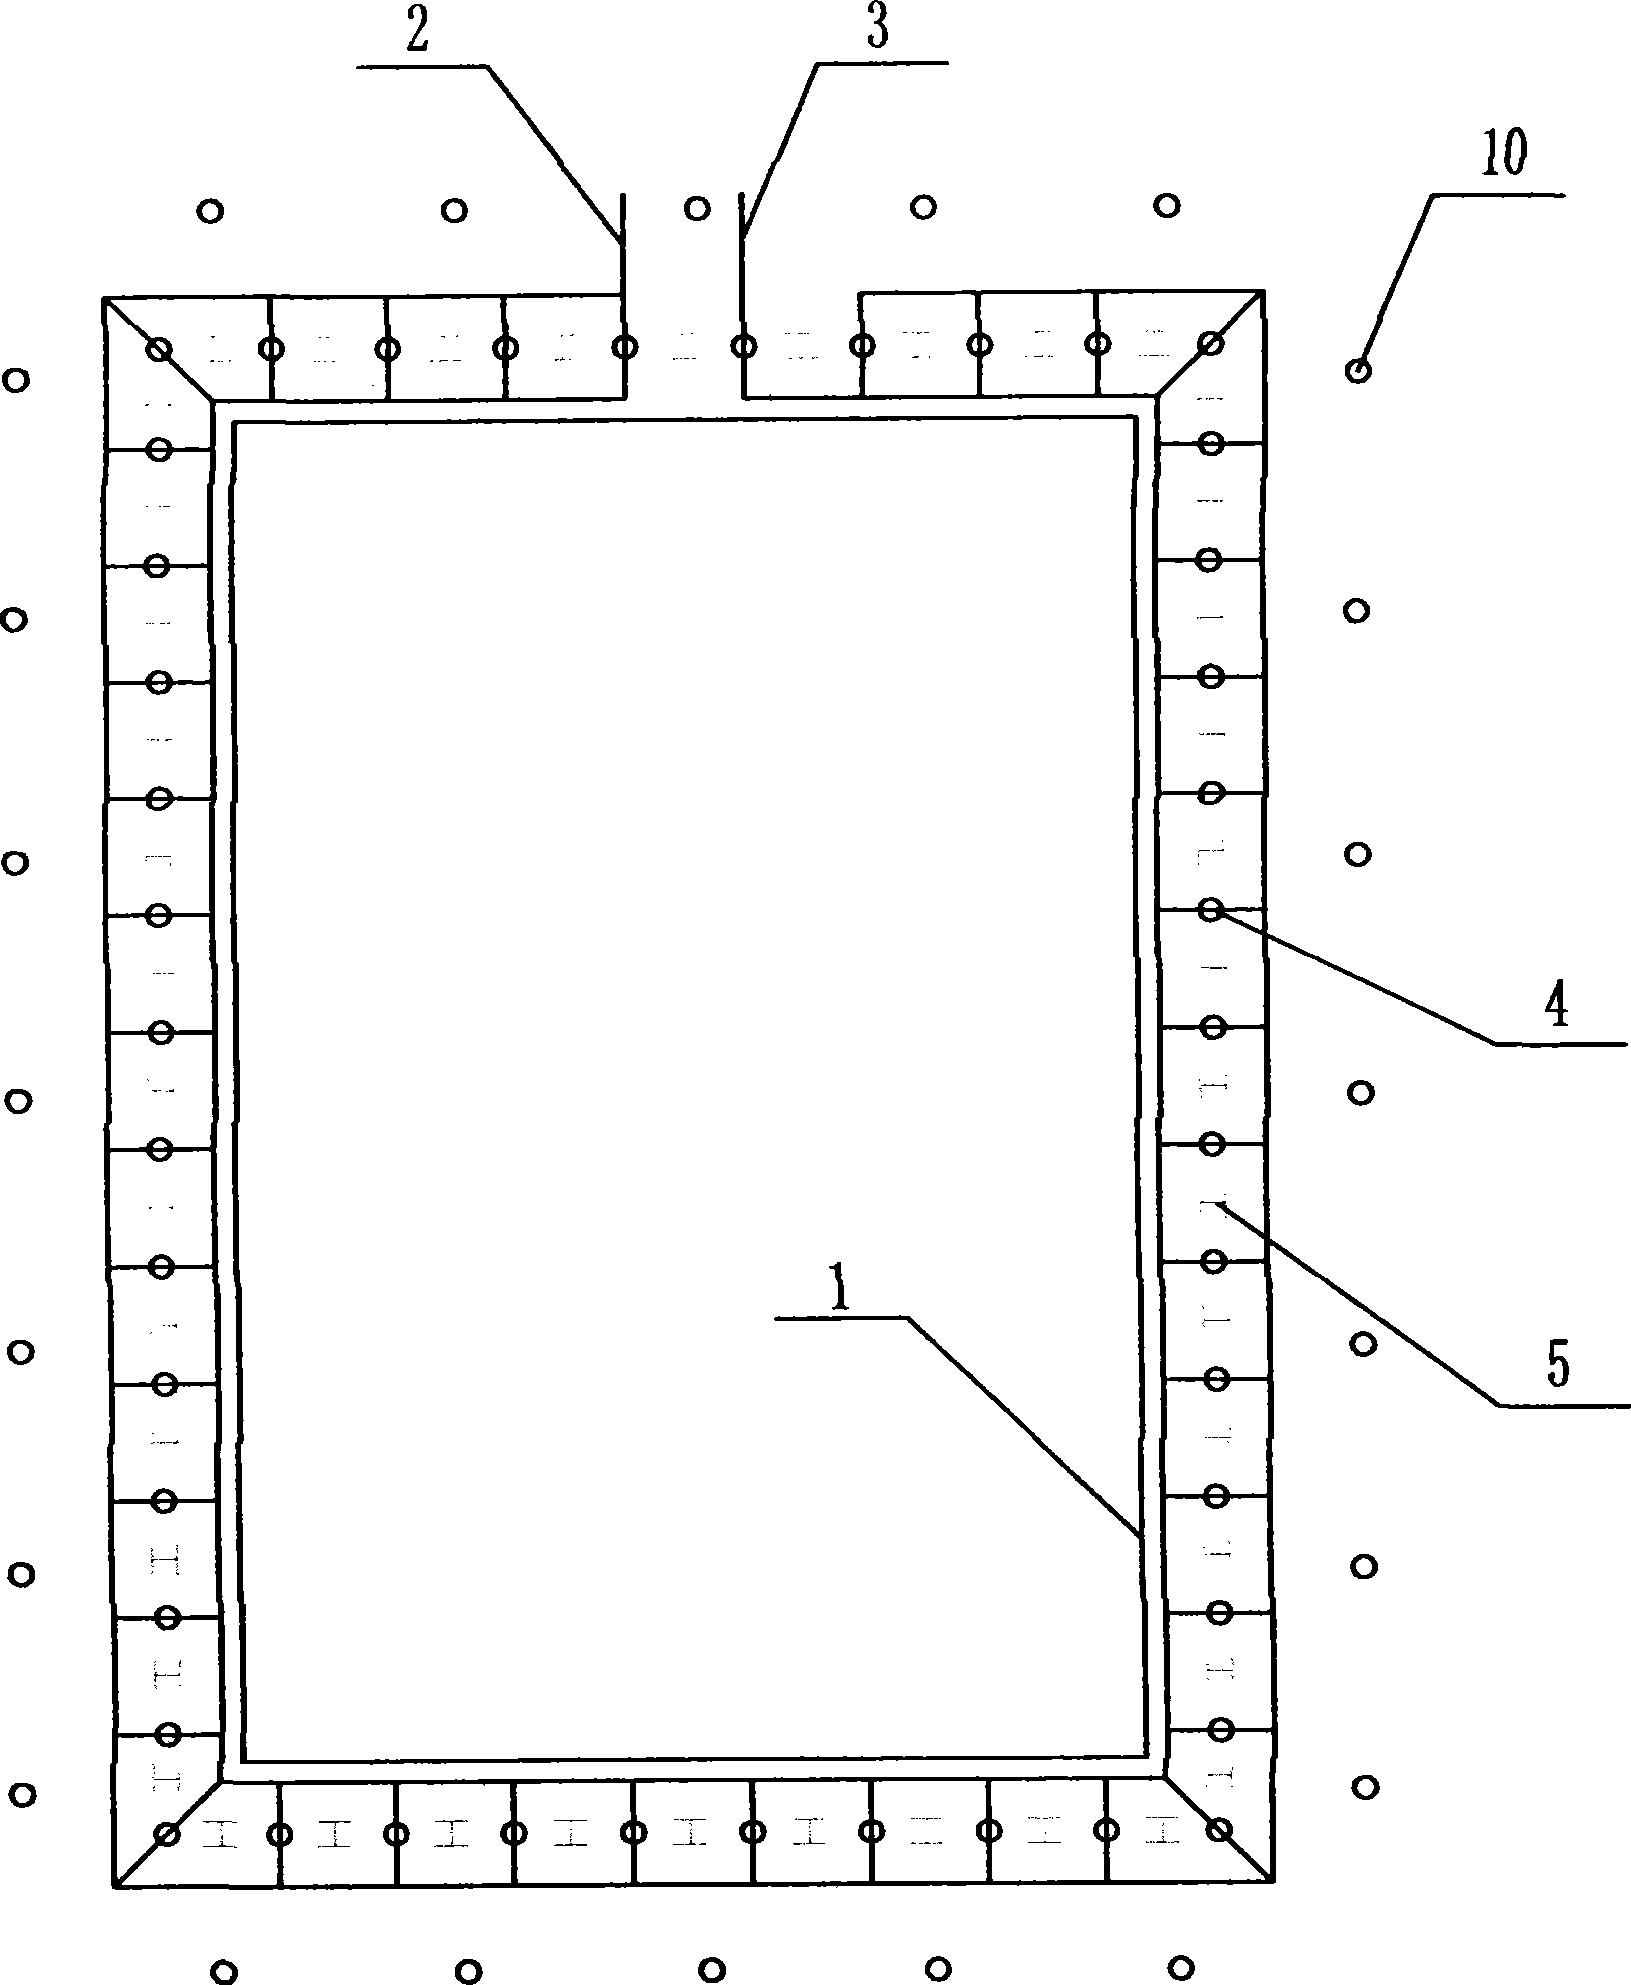 Profiled bar freezing wall foundation ditch combined enclosure method and its structure